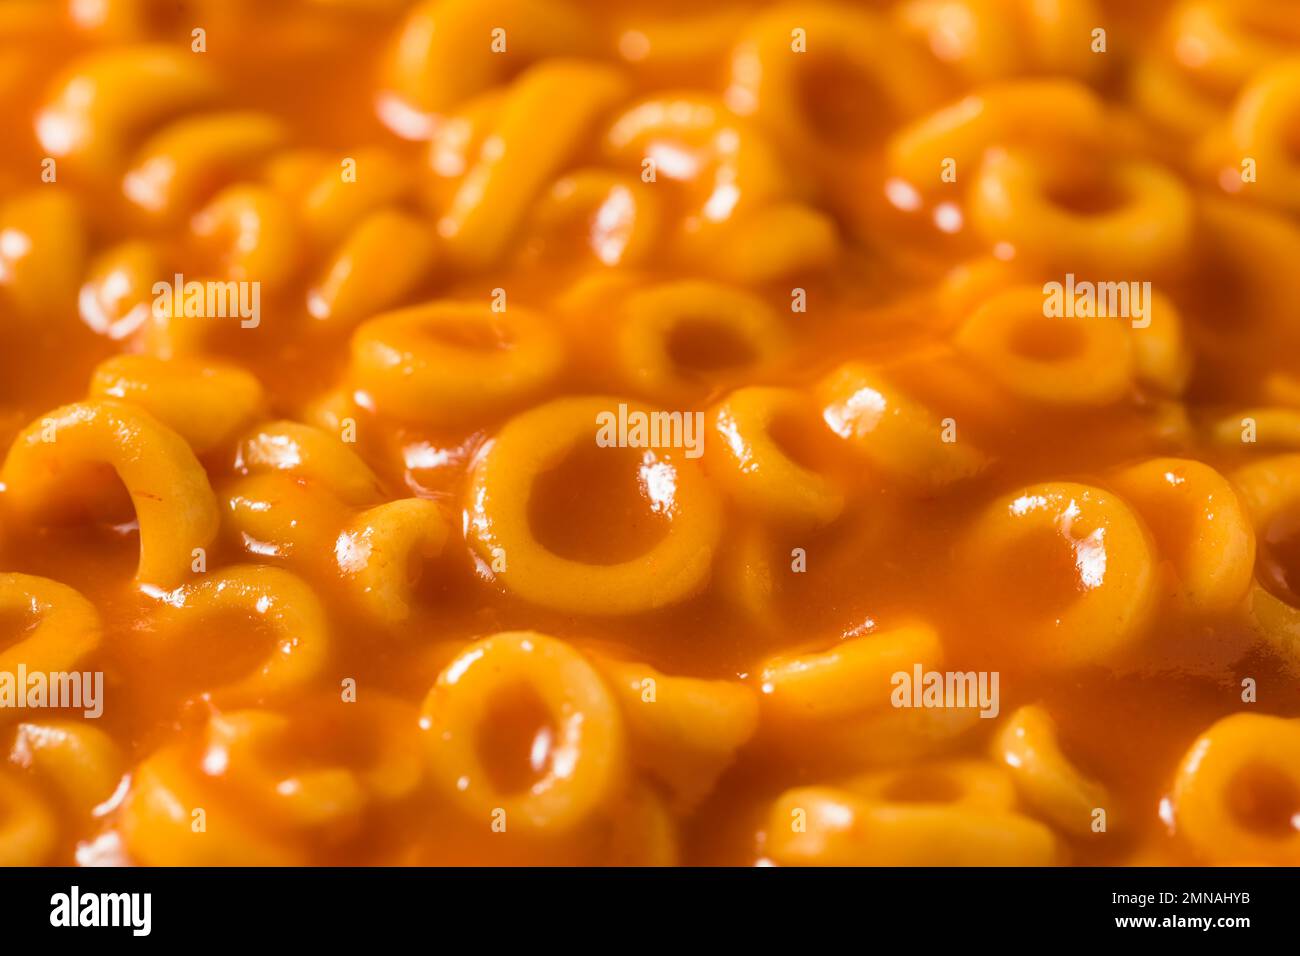 Homemade Canned Pasta Spaghetti Rings in Tomato Sauce Stock Photo - Alamy